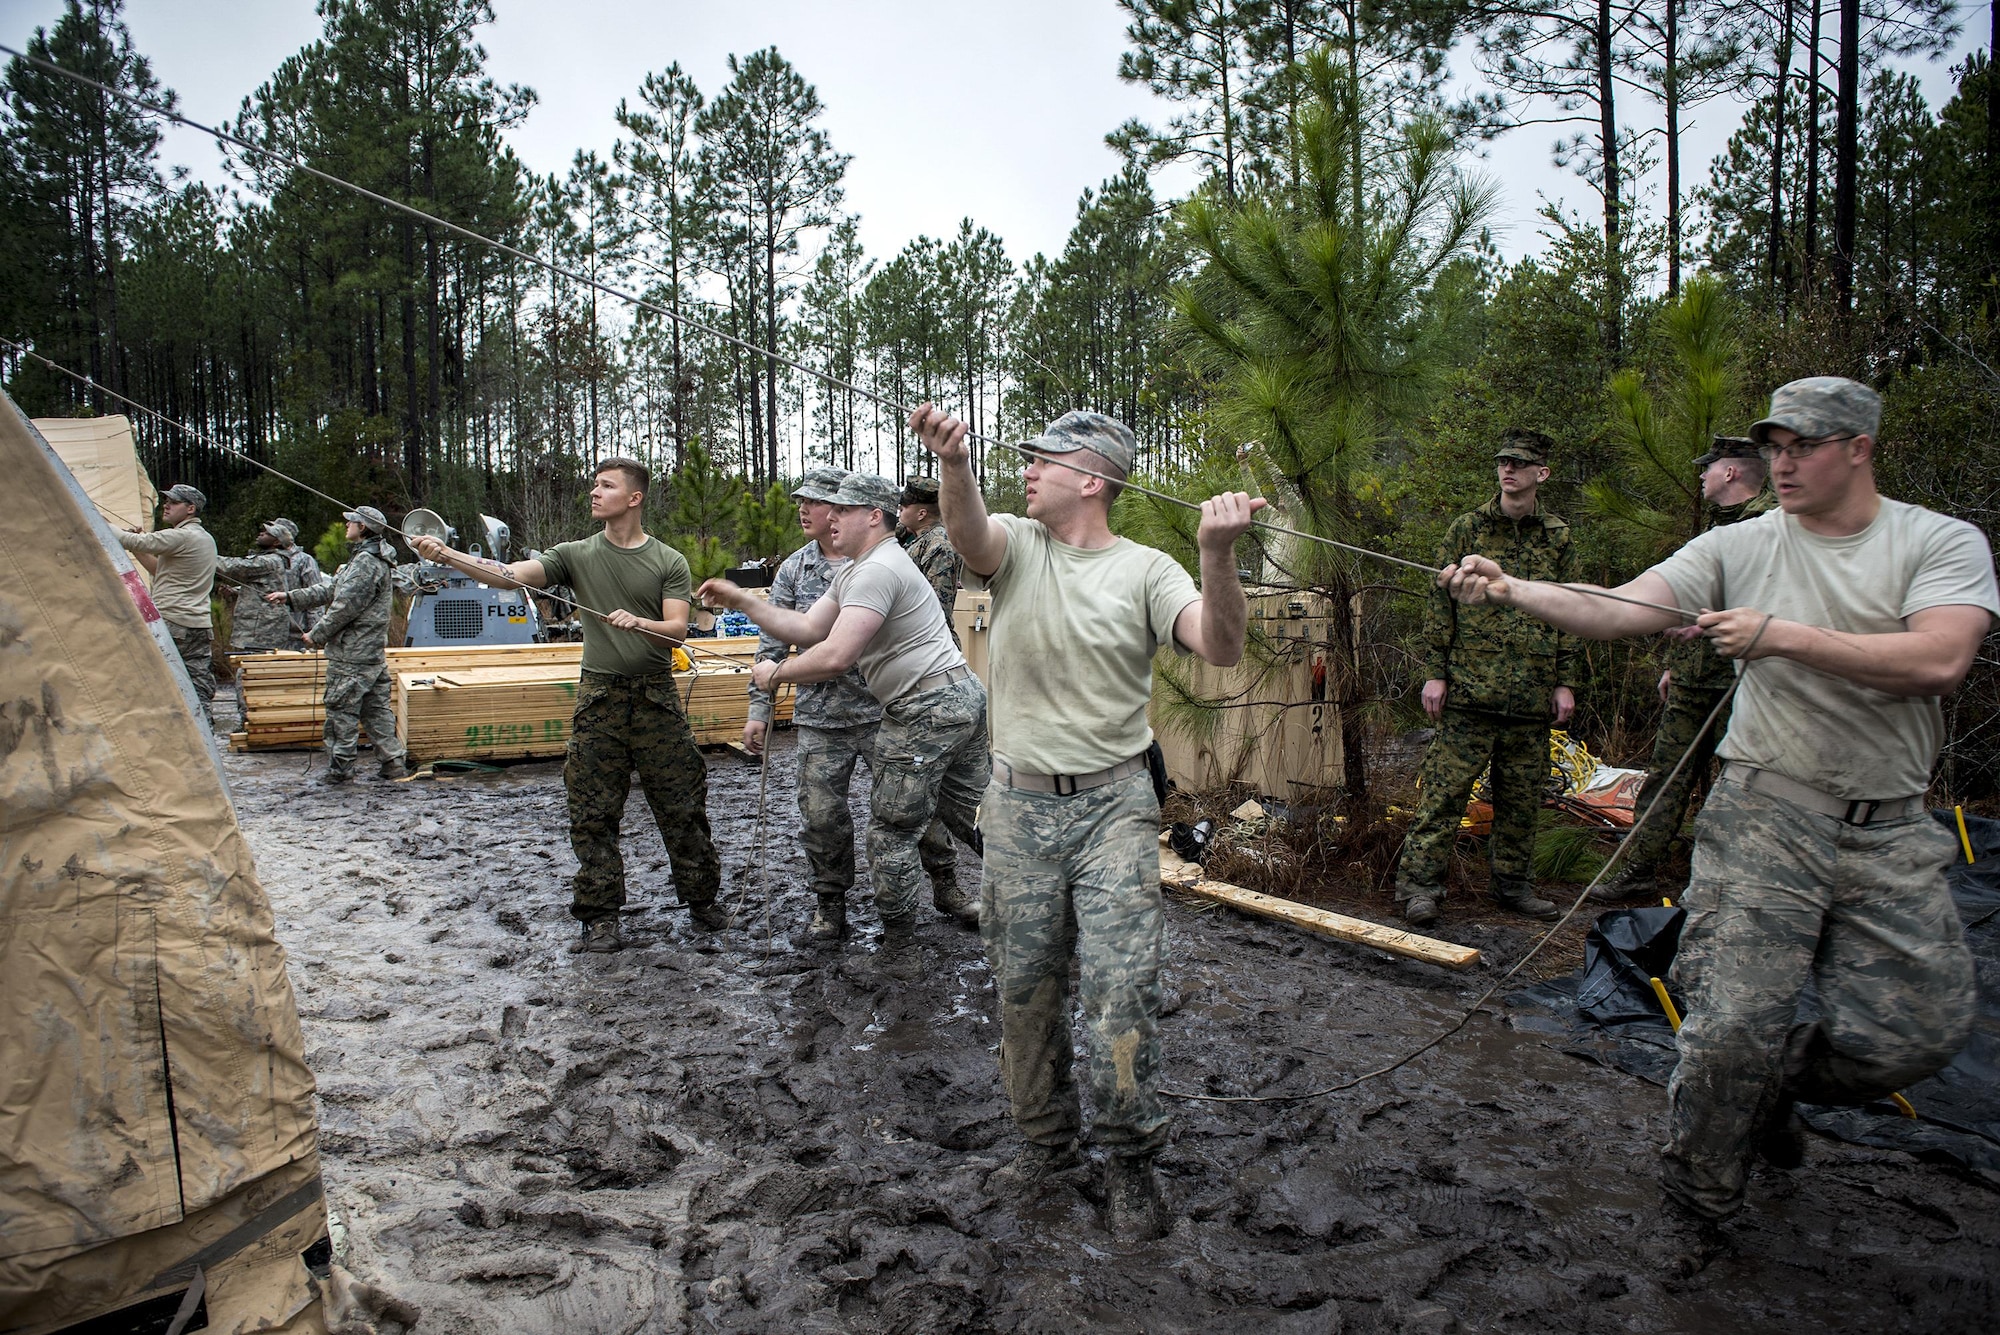 Airmen and Marines build a command post Feb. 24, 2015, near Statenville, Ga. Marines from Marine Corps Air Station Beaufort, S.C., are set to use the command post carry out a recovery mission following an F/A-18D Hornet assigned to MCAS Beaufort. The Airmen are assigned to the 23rd Civil Engineer Squadron. (U.S. Air Force photo/Senior Airman Sandra Marrero)